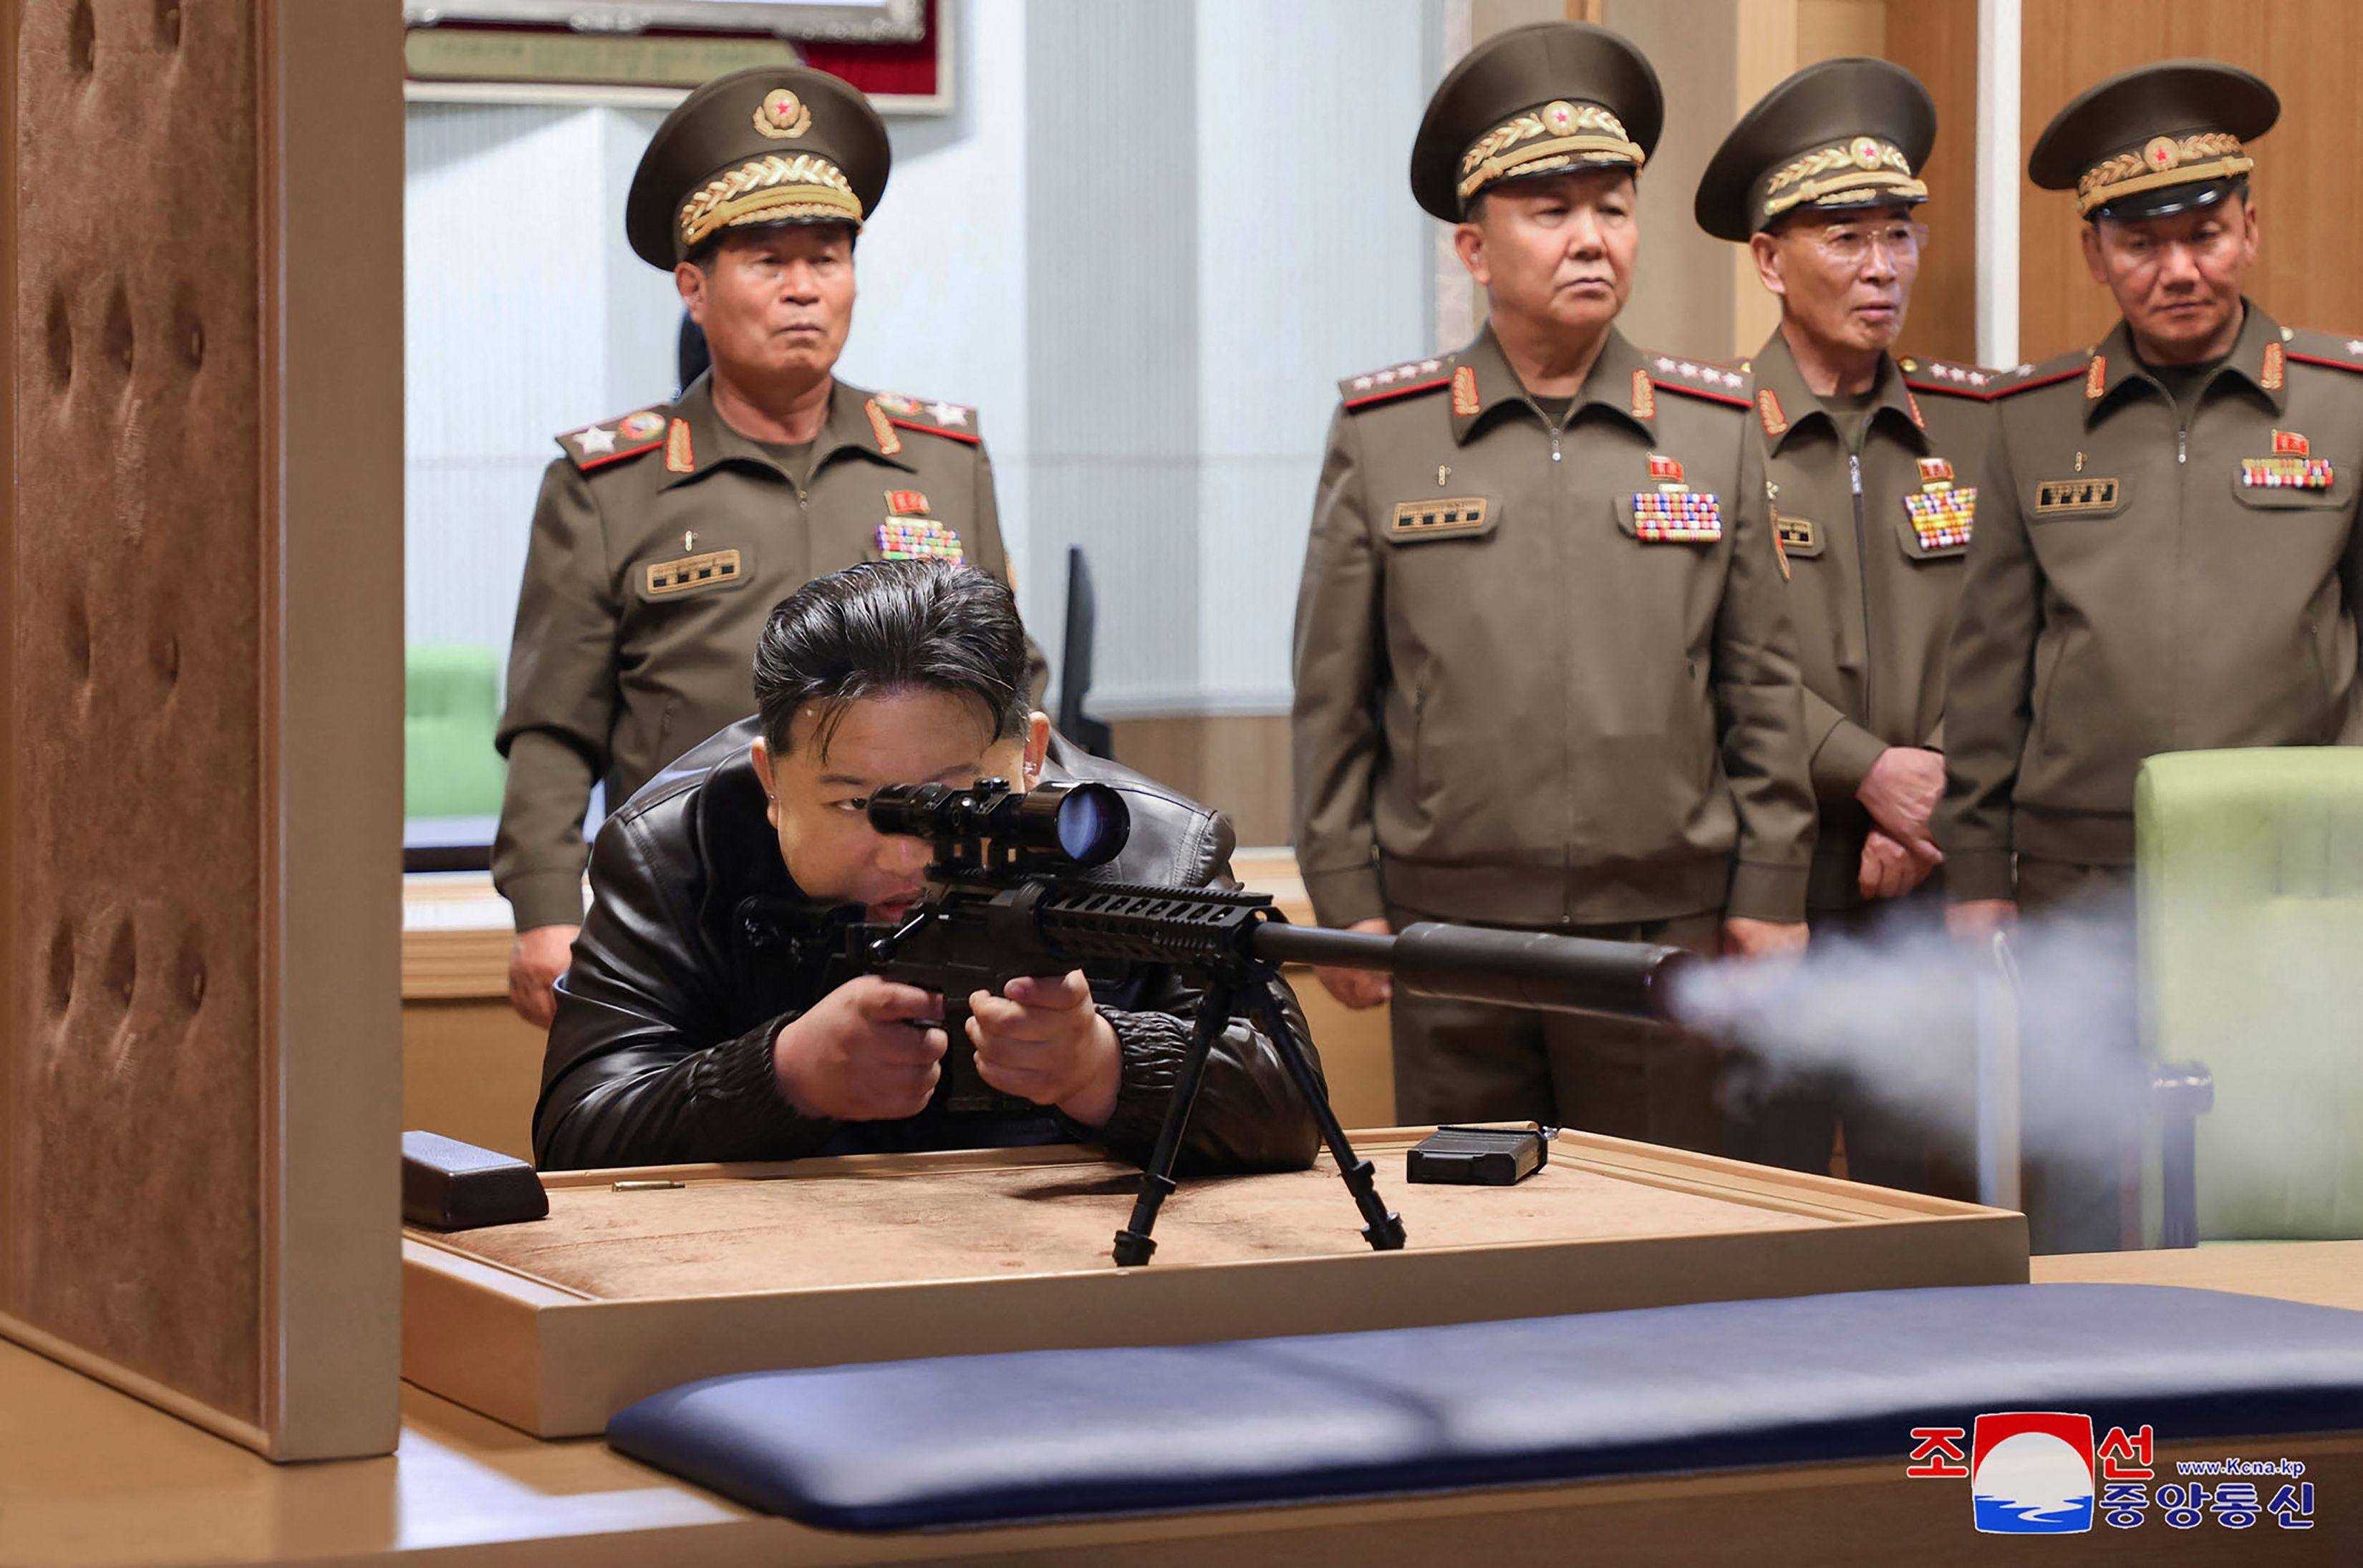 North Korean leader Kim Jong-un tests a sniper rifle during a visit to an arms manufacturer at an undisclosed location over the weekend. Photo: KCNA via KNS / AFP